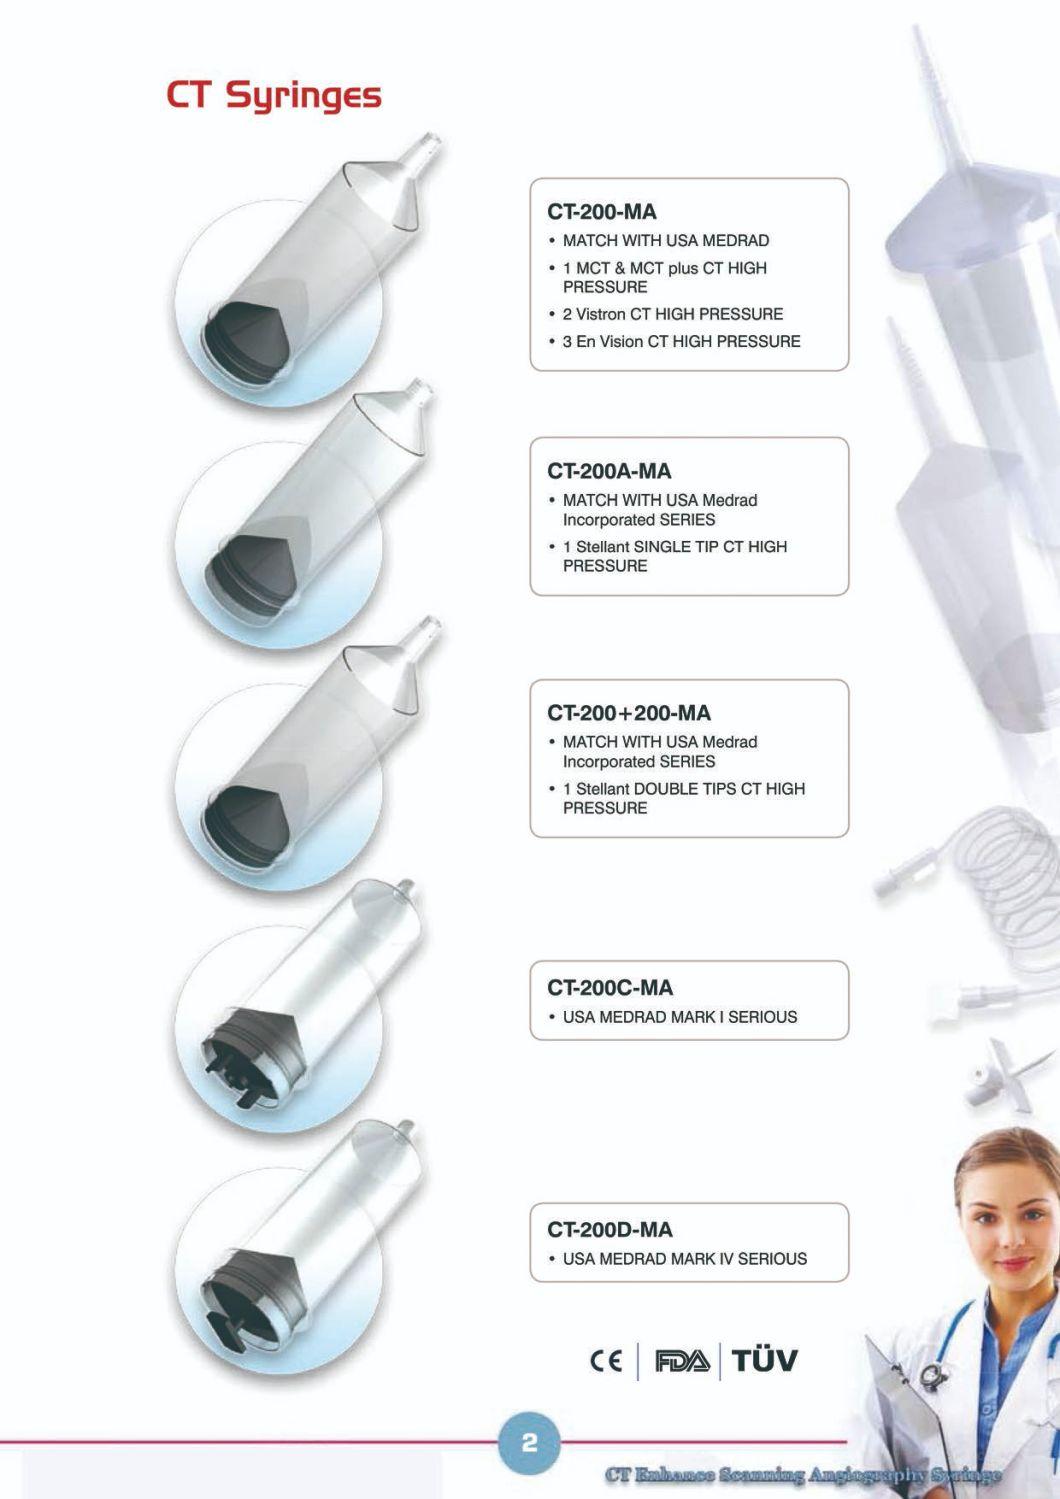 CT Syringe Medical Injector Match with USA Medrad